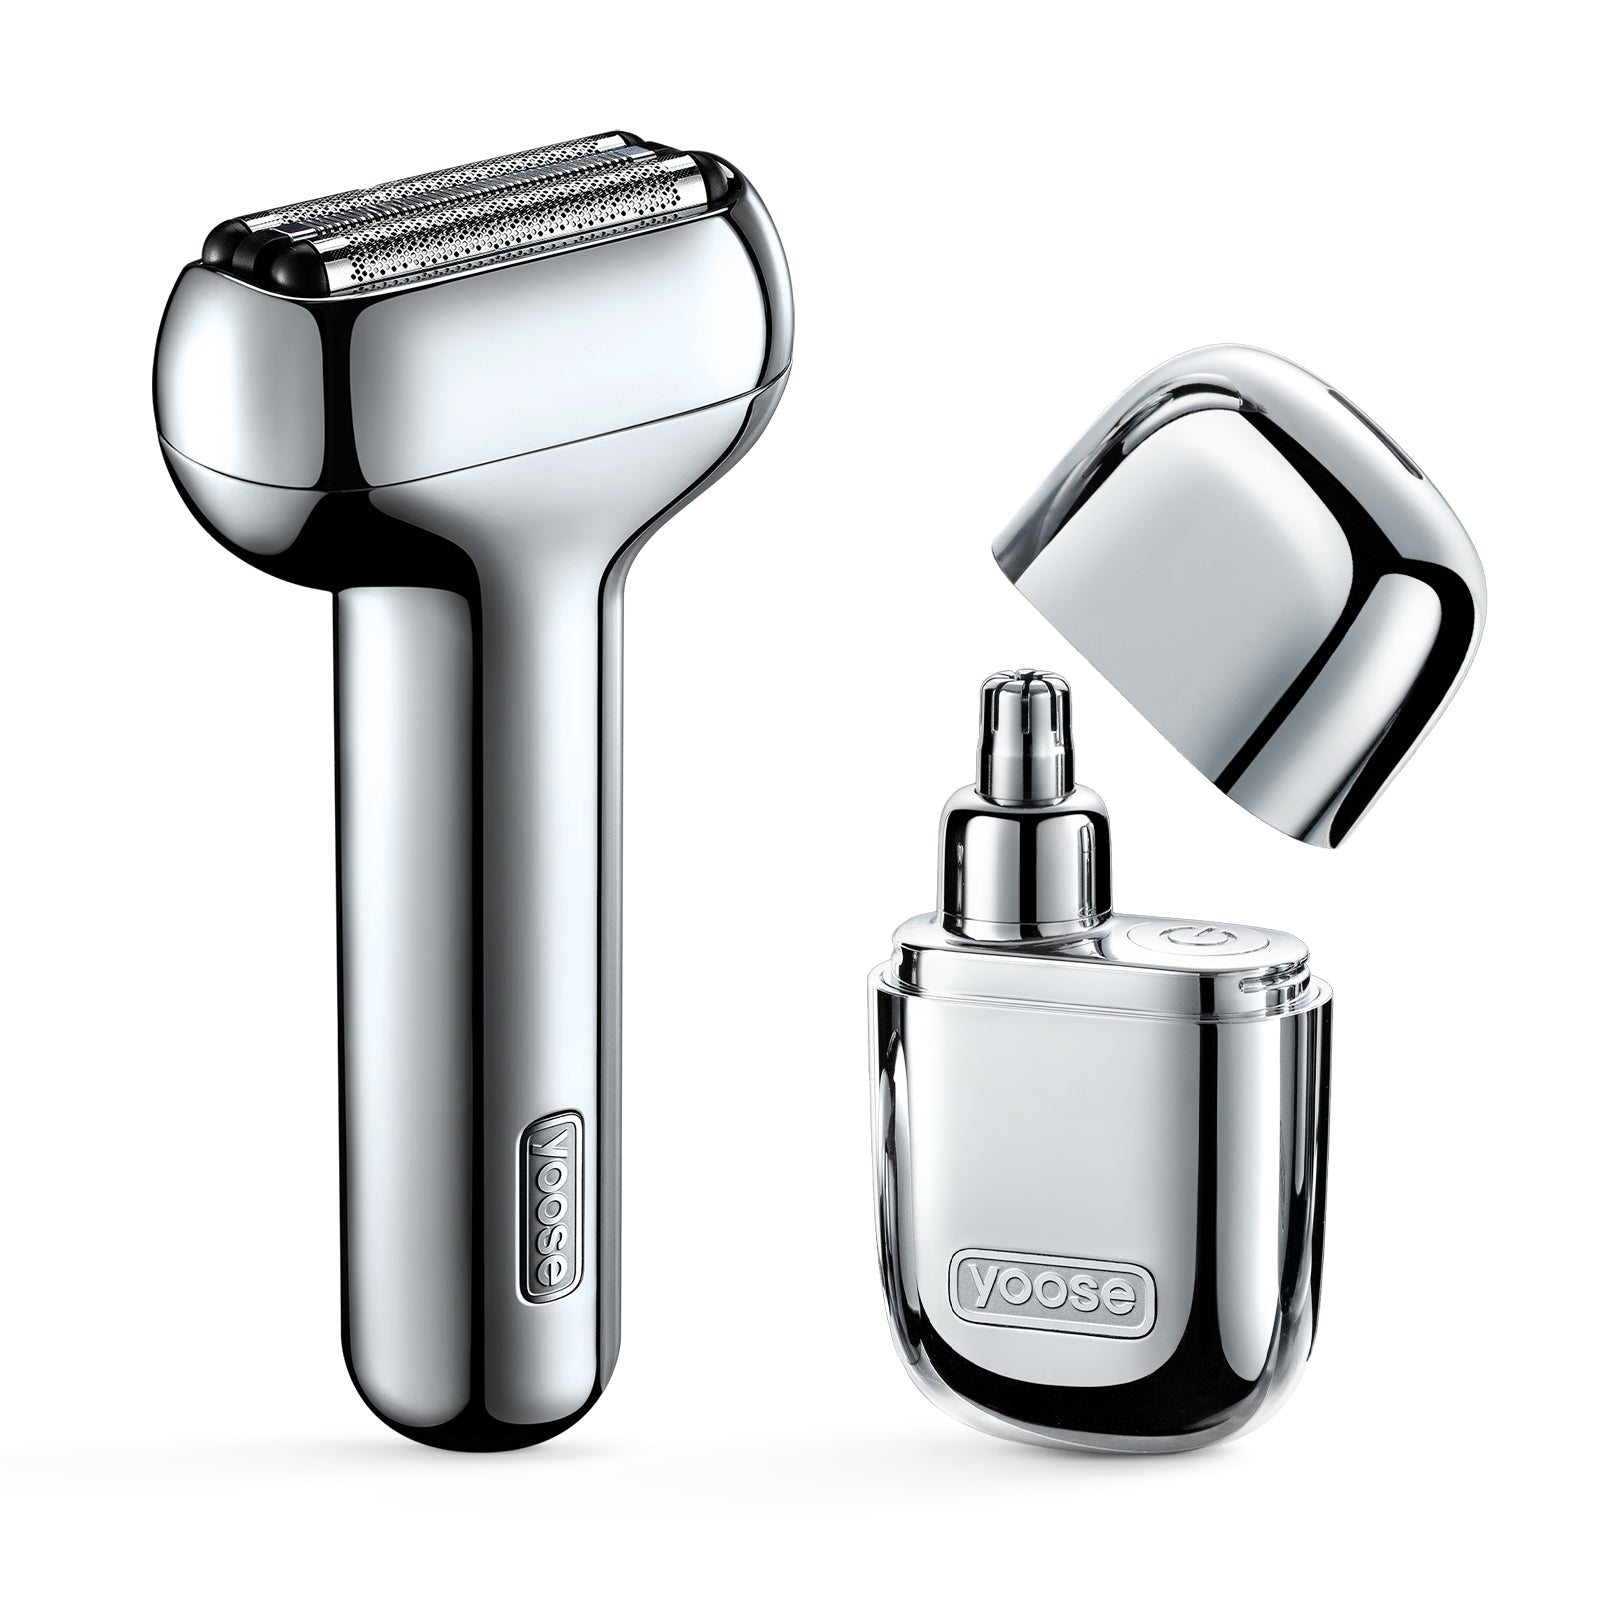 yoose Alloy Foil Shaver Cordless Travel Shaver with Leather Case